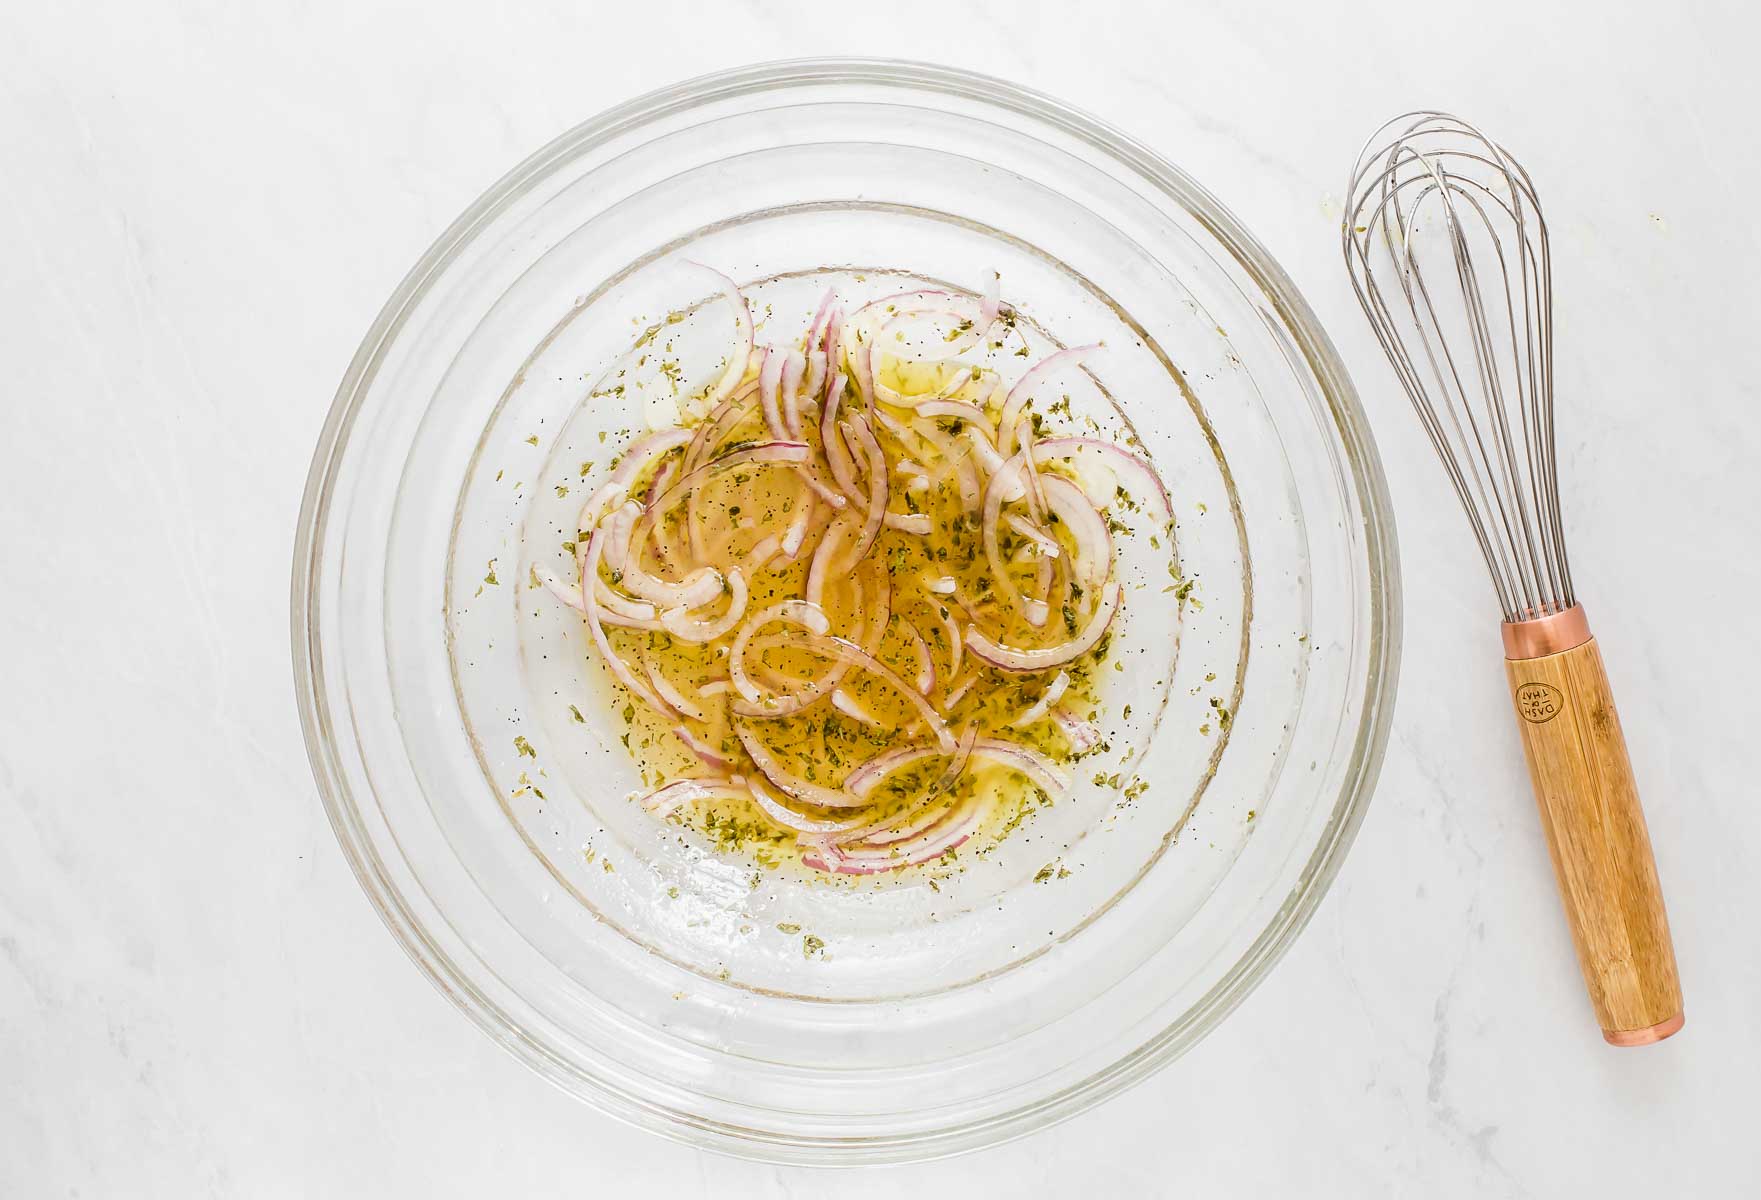 Thinly sliced onions in vinaigrette.